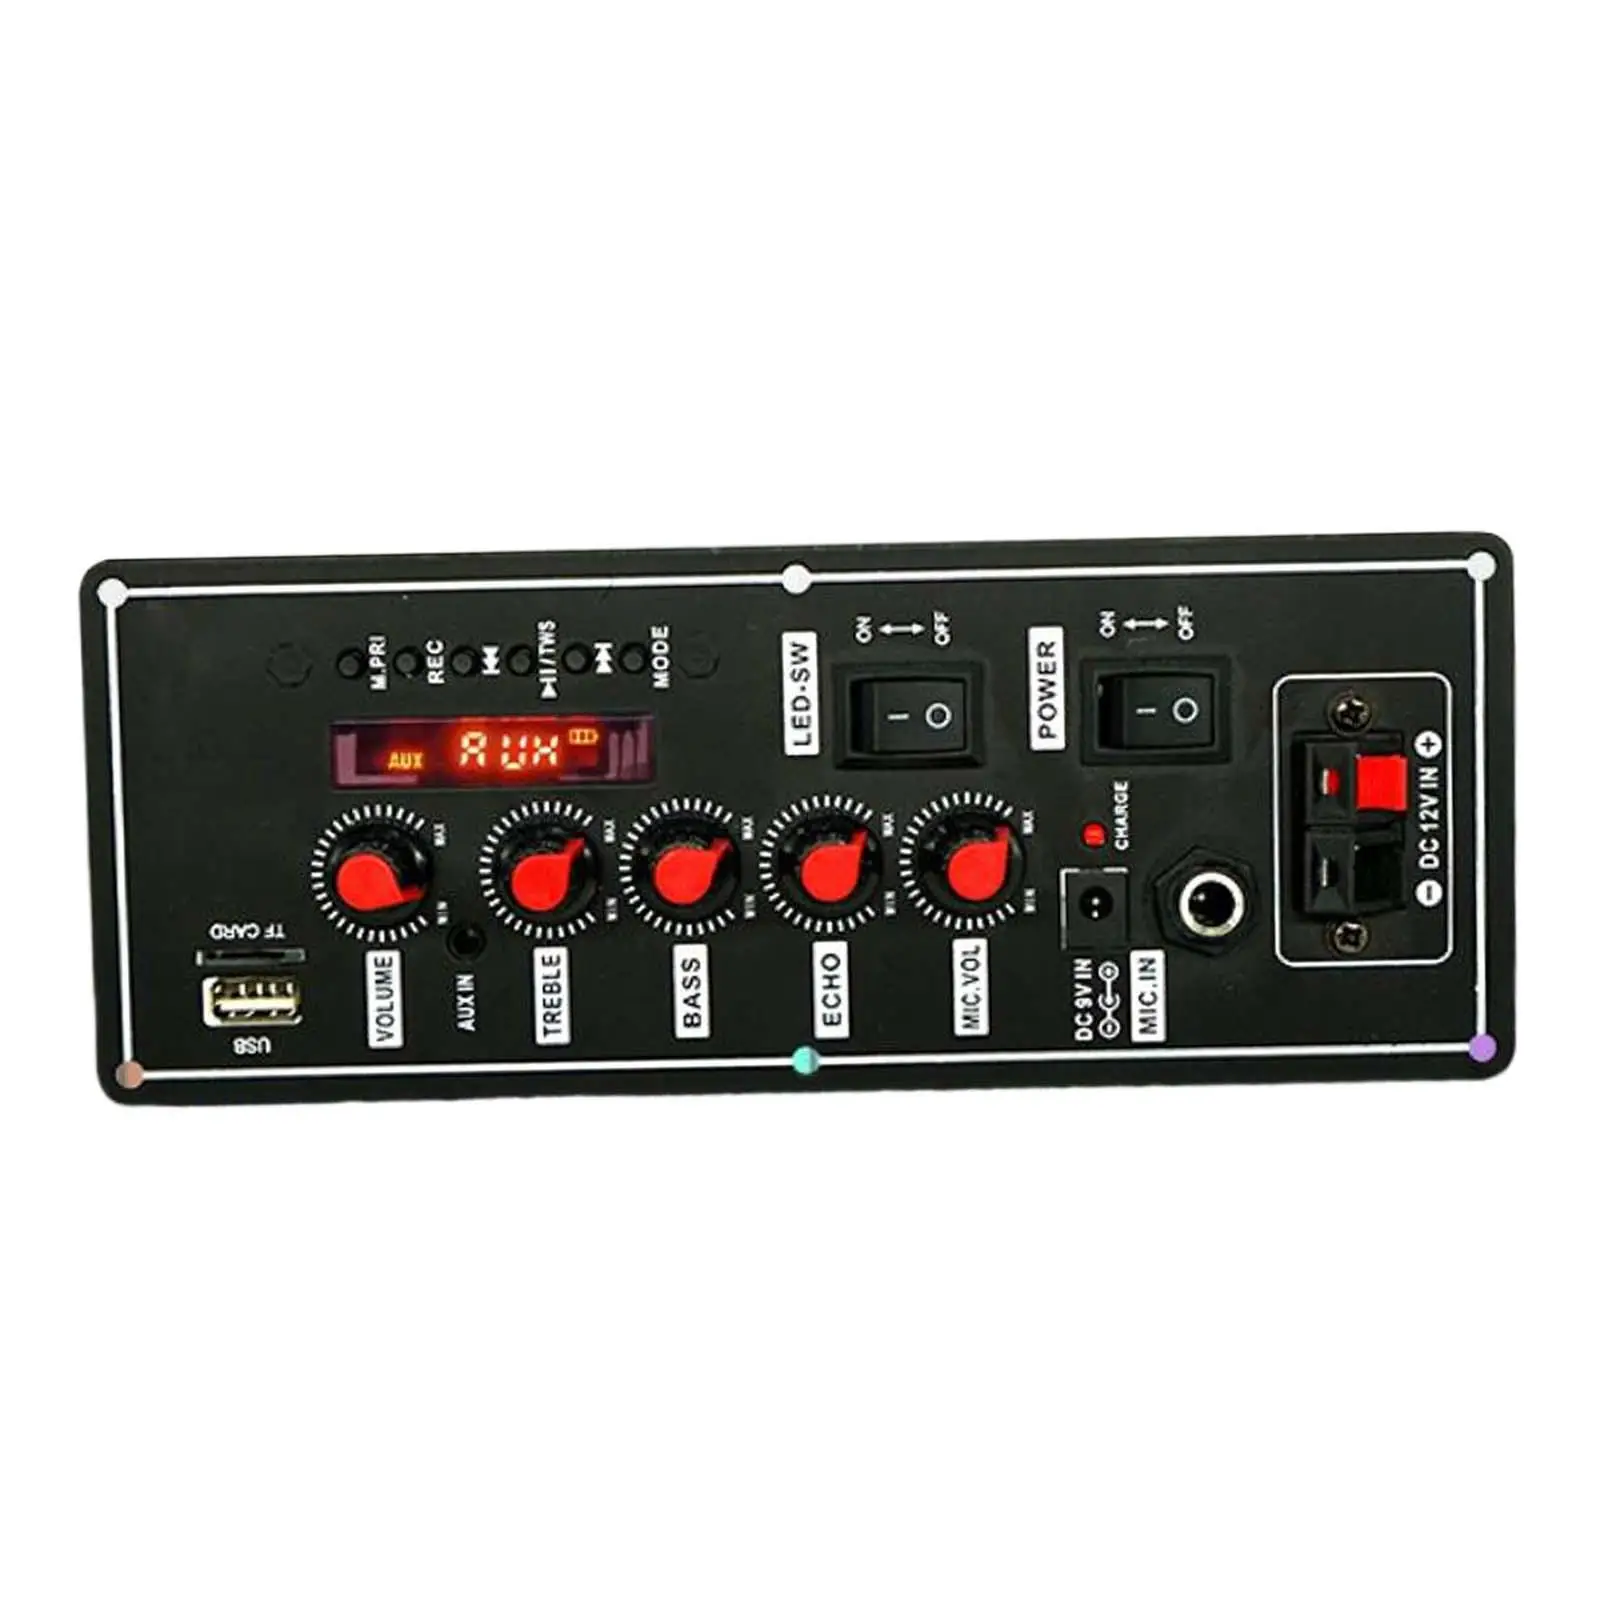 MP3 Decoder Player Module Button Control 2x10W Support MP3/WMA/WAV/flac/ape Audio Decode Board for Speaker or Other Appliances